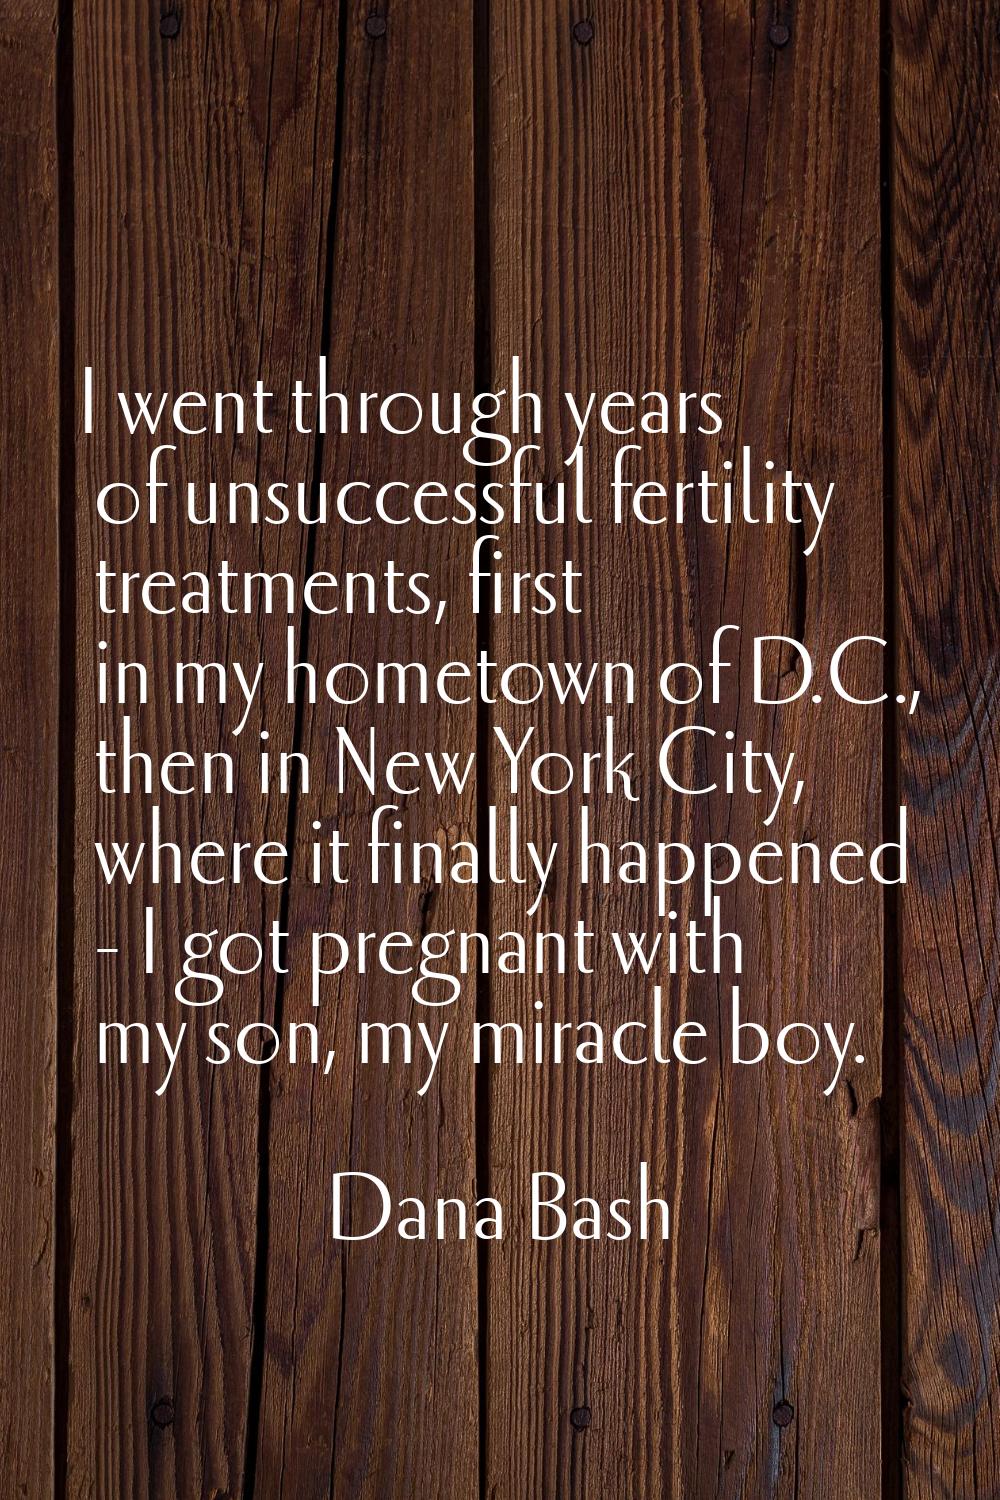 I went through years of unsuccessful fertility treatments, first in my hometown of D.C., then in Ne